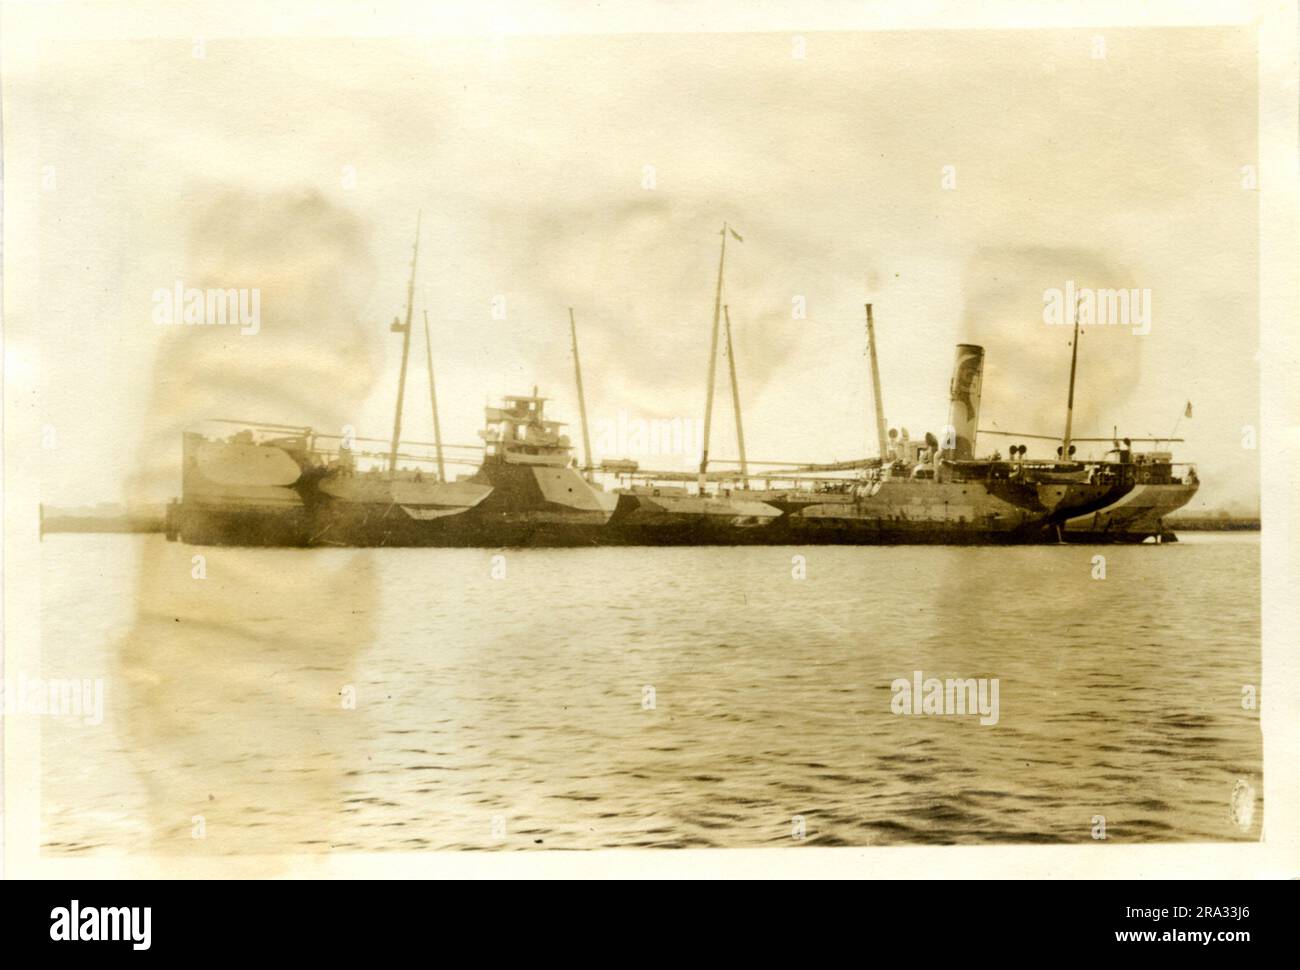 Photograph of the Port View of the SS Socony. Photograph of port view. Date: - Sept. 12th., 1918. Photograph of S. S. Socony. Nationality: - American. Tonnage: - 3663. Captain: - T. Jonassen. Owners: - Std. Oil Co. Where From: - Wilmington, N. C. Destination: - San Pico, Mexico. Where Photographed: - Charleston, S. C. Sixth Naval District. By Whom Photographed: - J. B. Dearborn. Date: -Aug. 10th., 1918. Where Camouflaged: -New York. Date: - March 10th., '18. By Orders of the U. D. U. S. Gov't. Type of ship: - Oil Tanker. Length: - 320 ft., Beam: -46.22 ft., Draft: - 24 ft. Starboard unobtainab Stock Photo